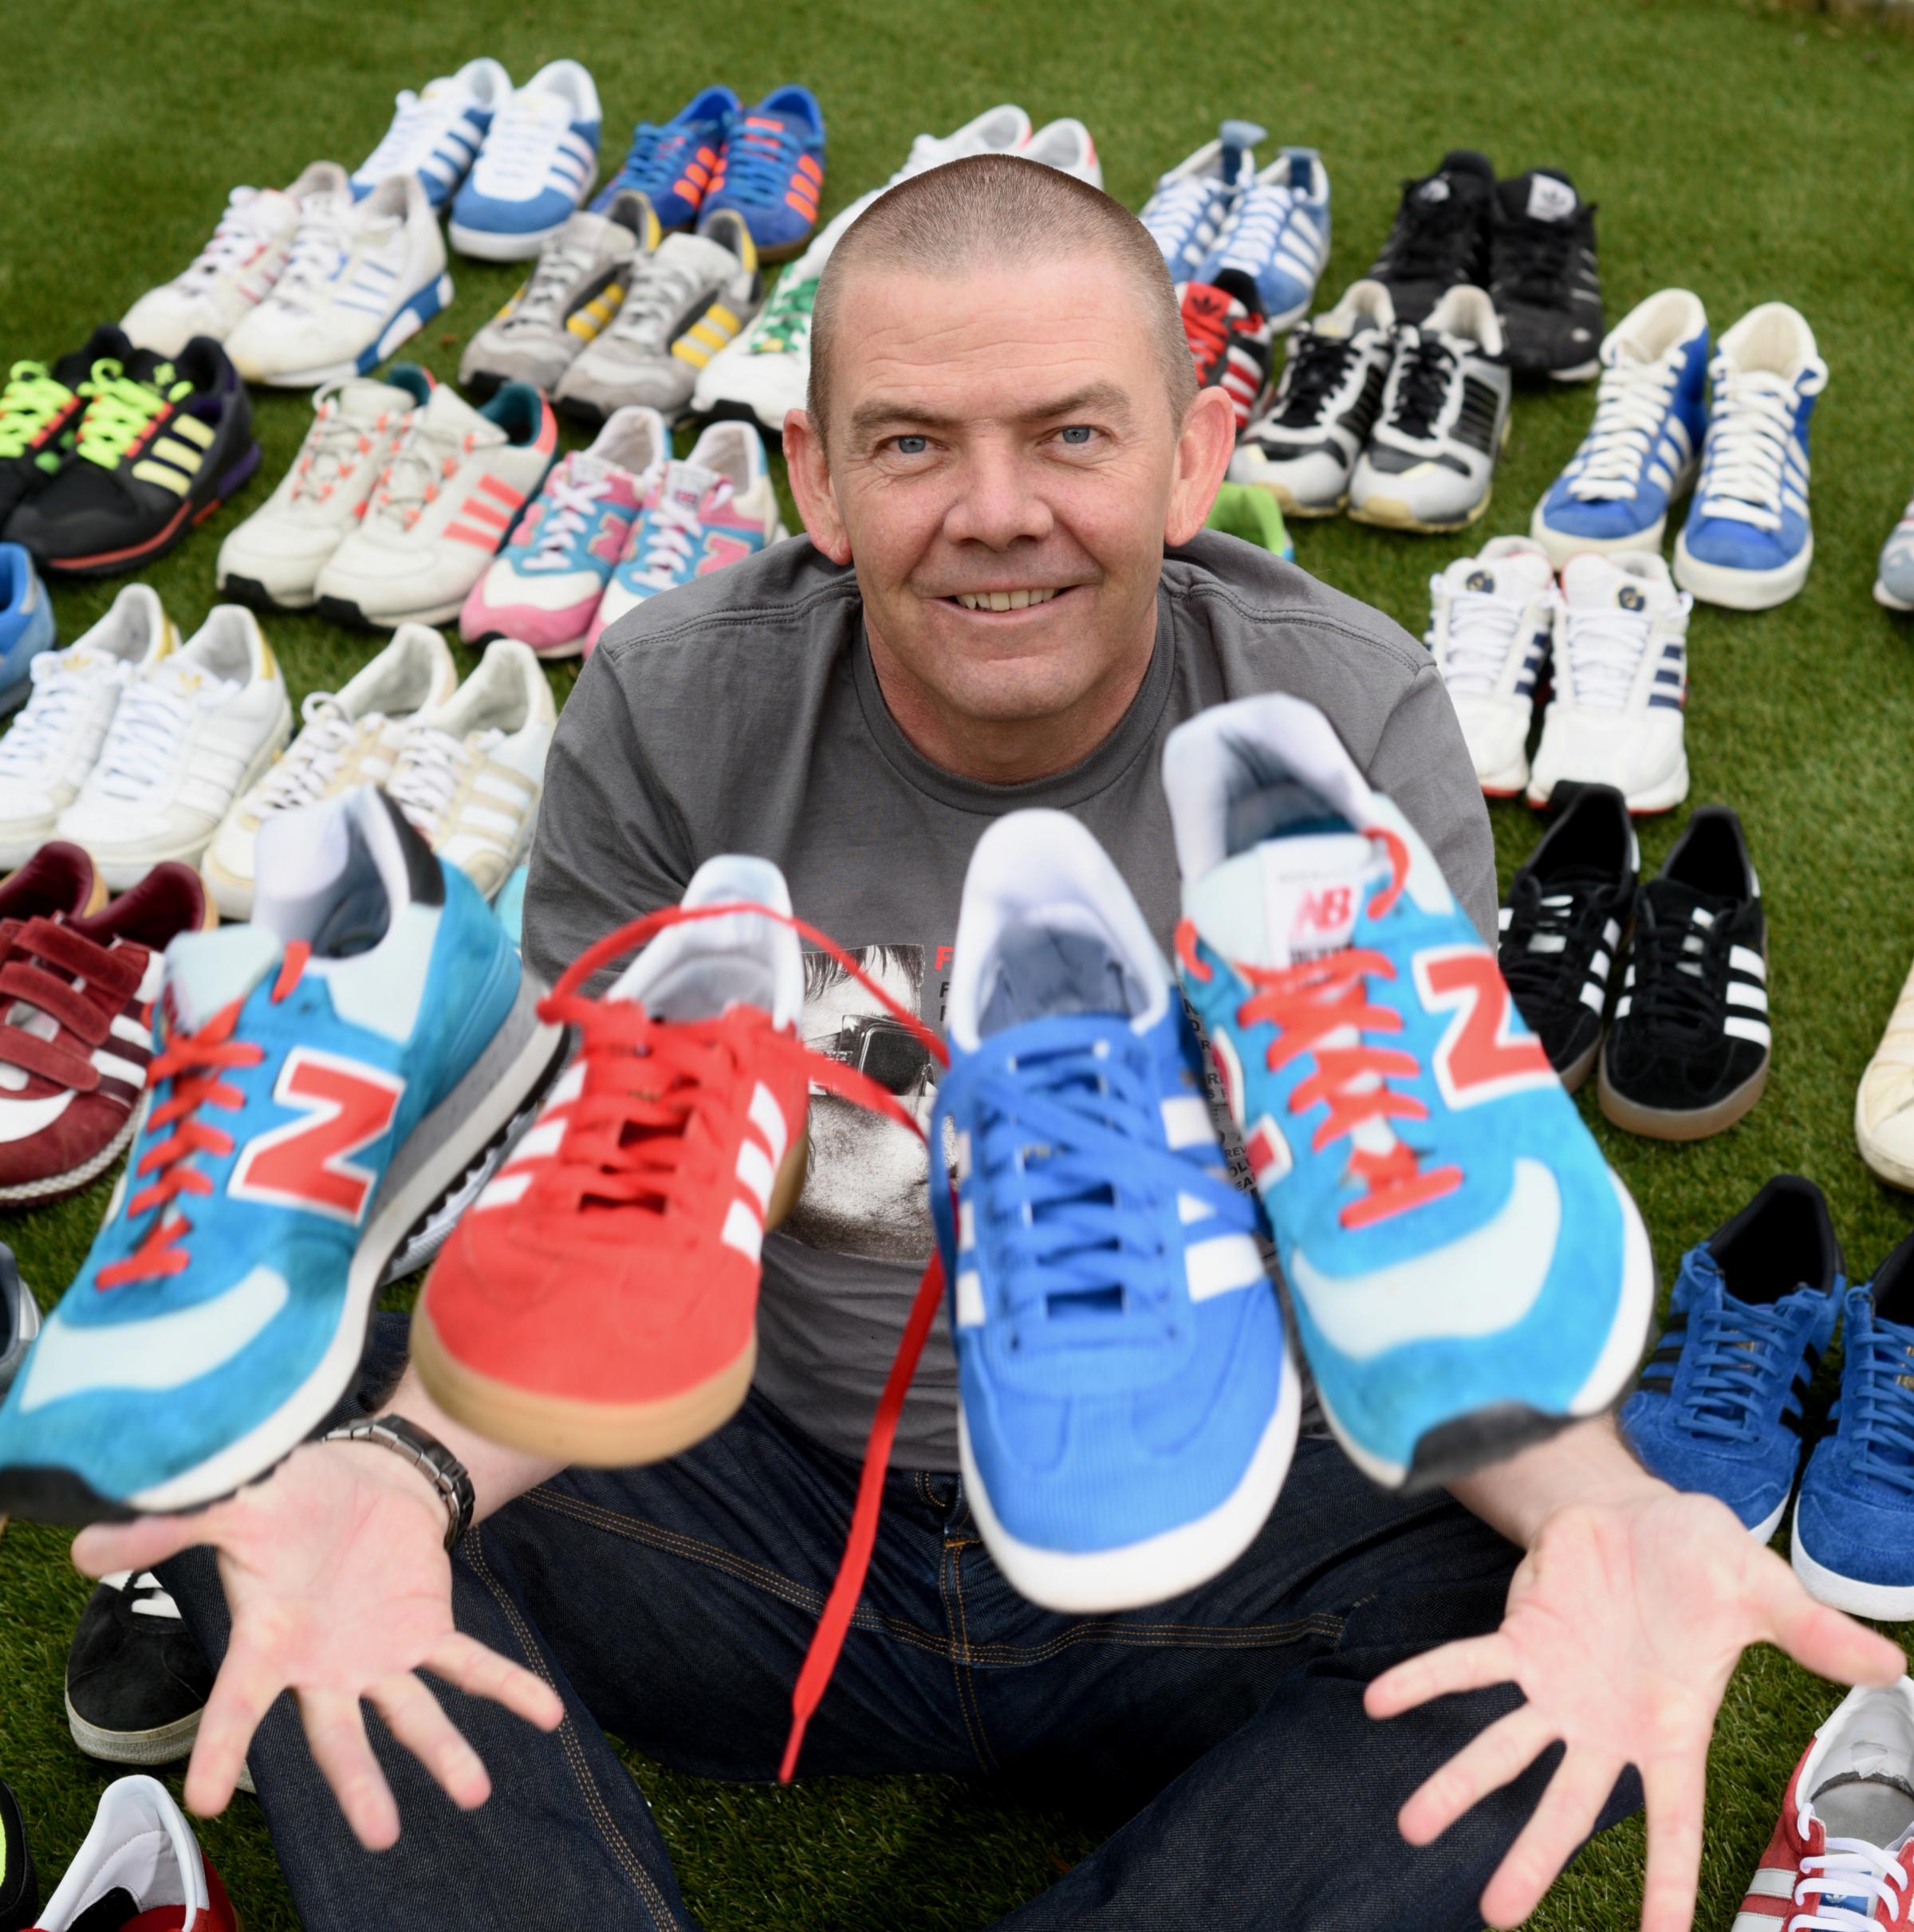 Ross finds new balance with trainers business idea | Dunfermline Press